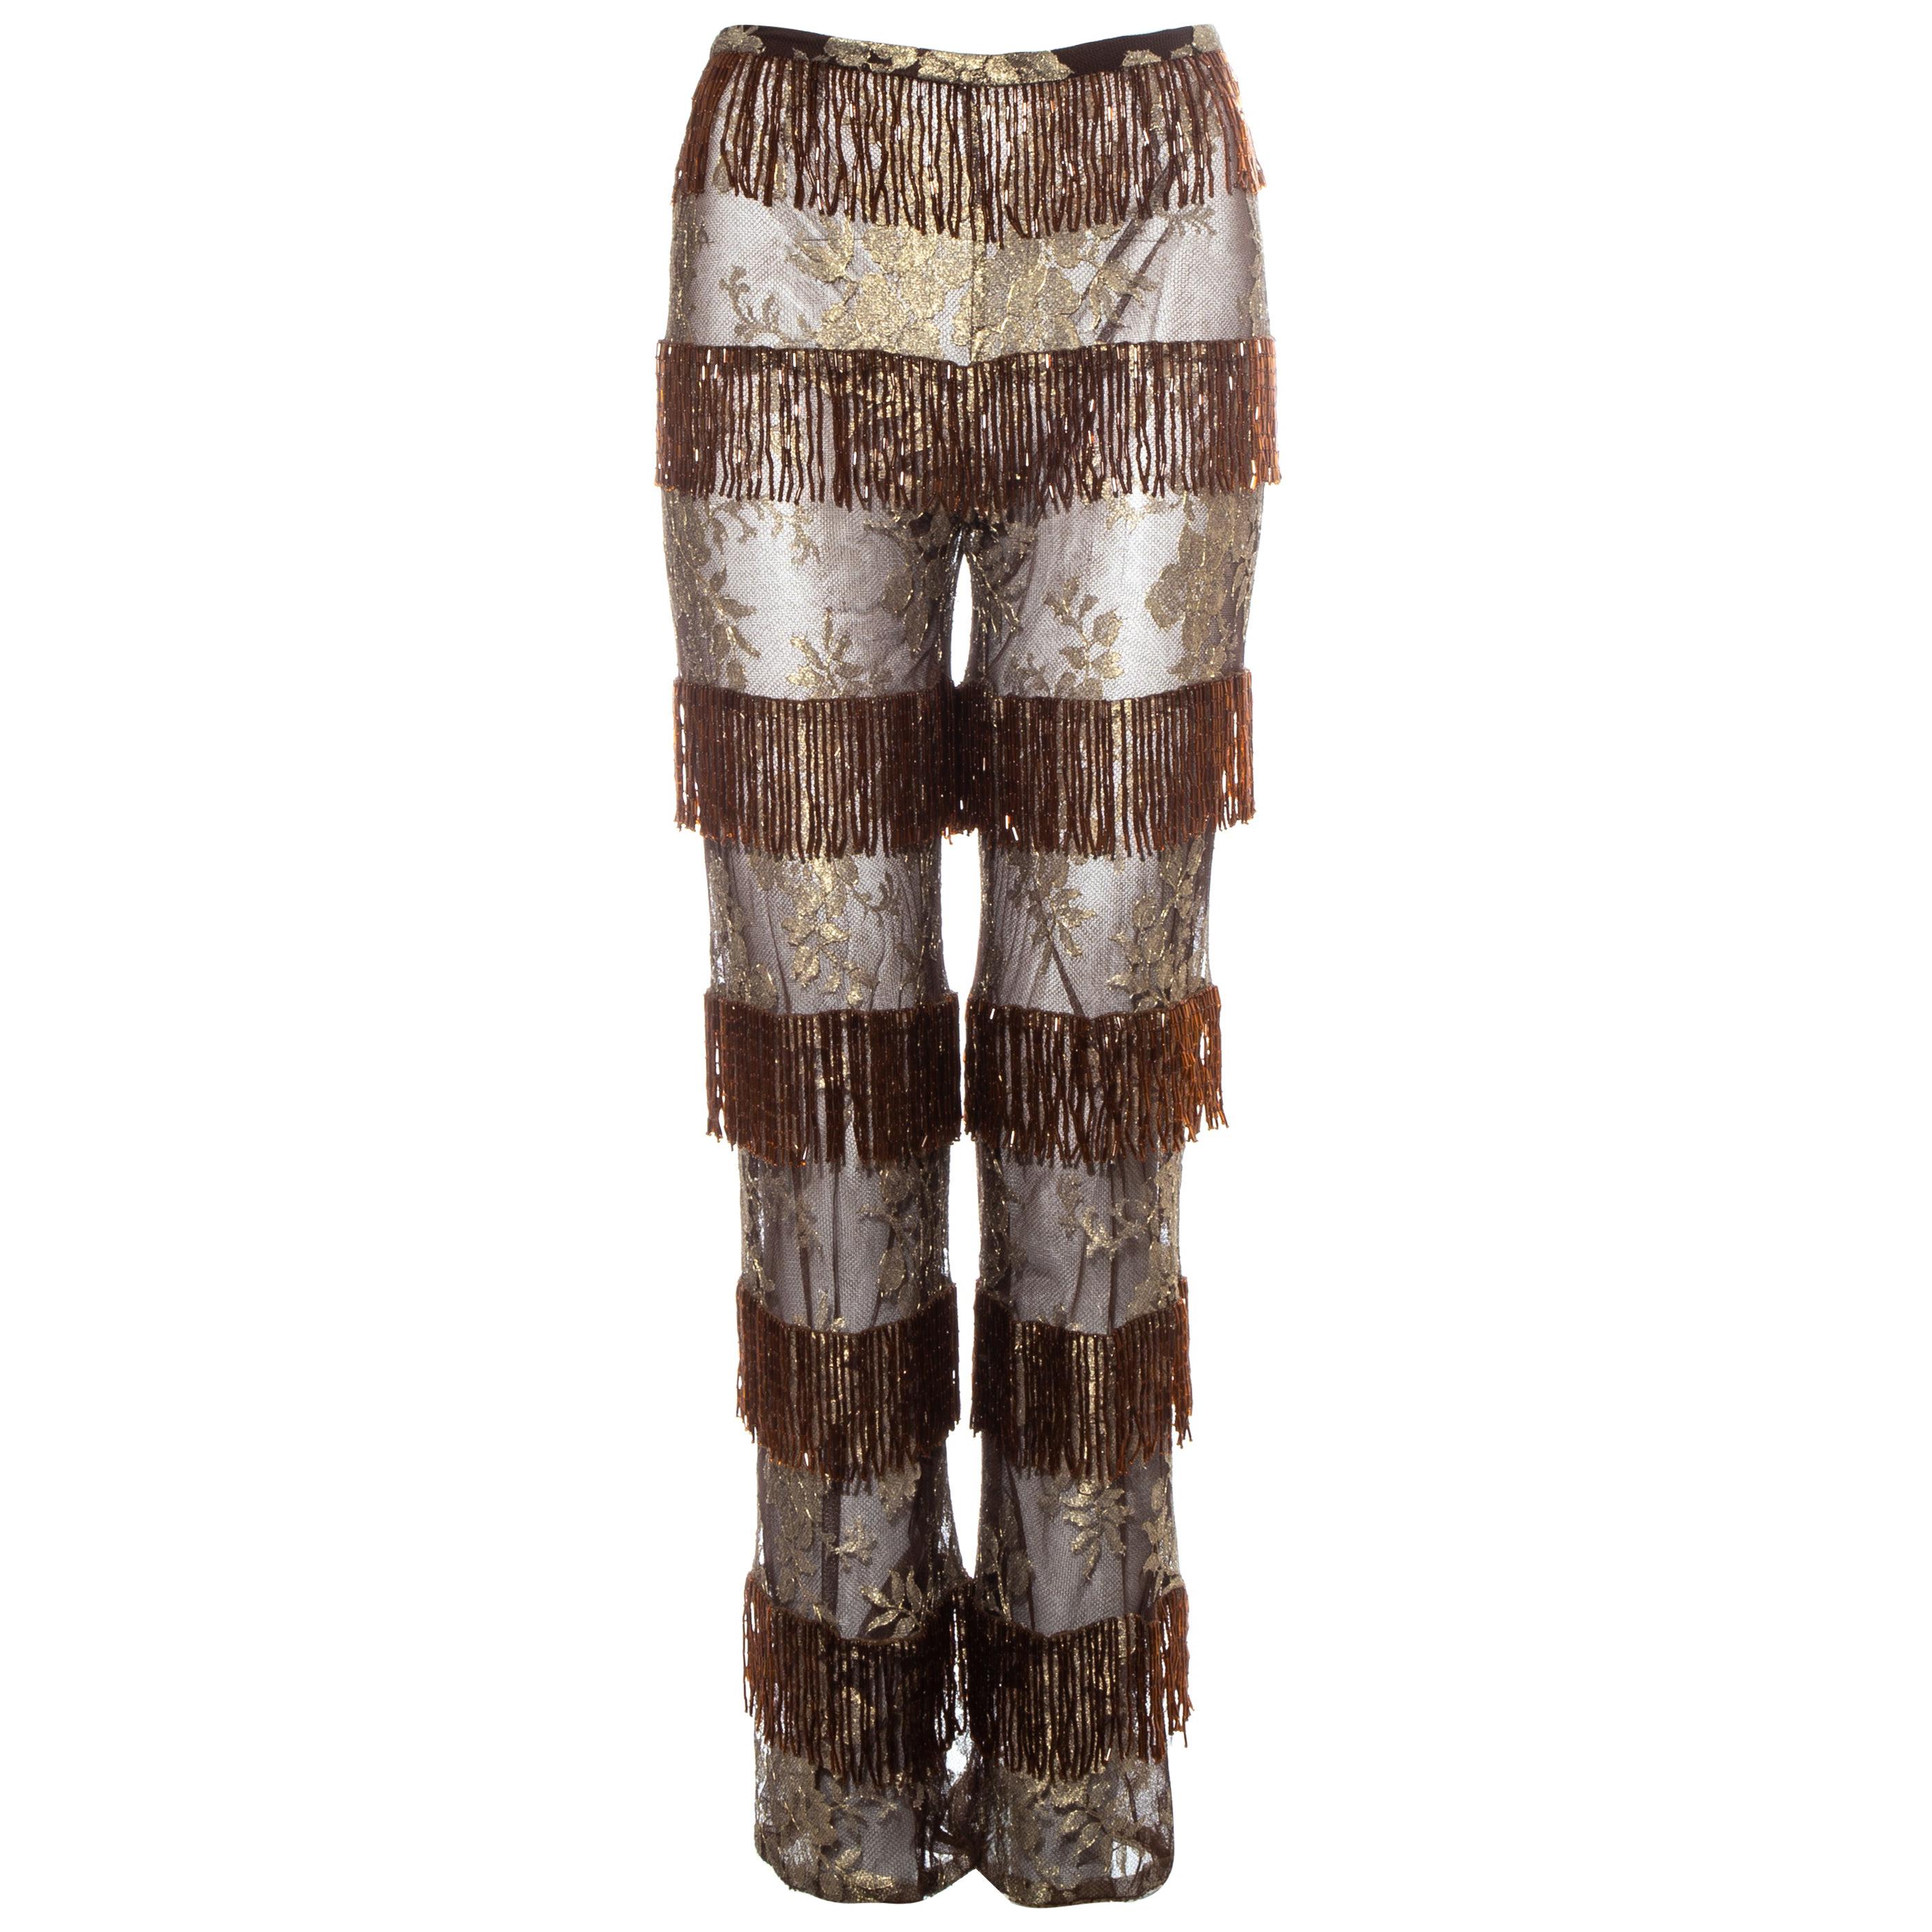 Dolce & Gabbana copper and gold lace beaded fringe pants, ss 2000 For Sale